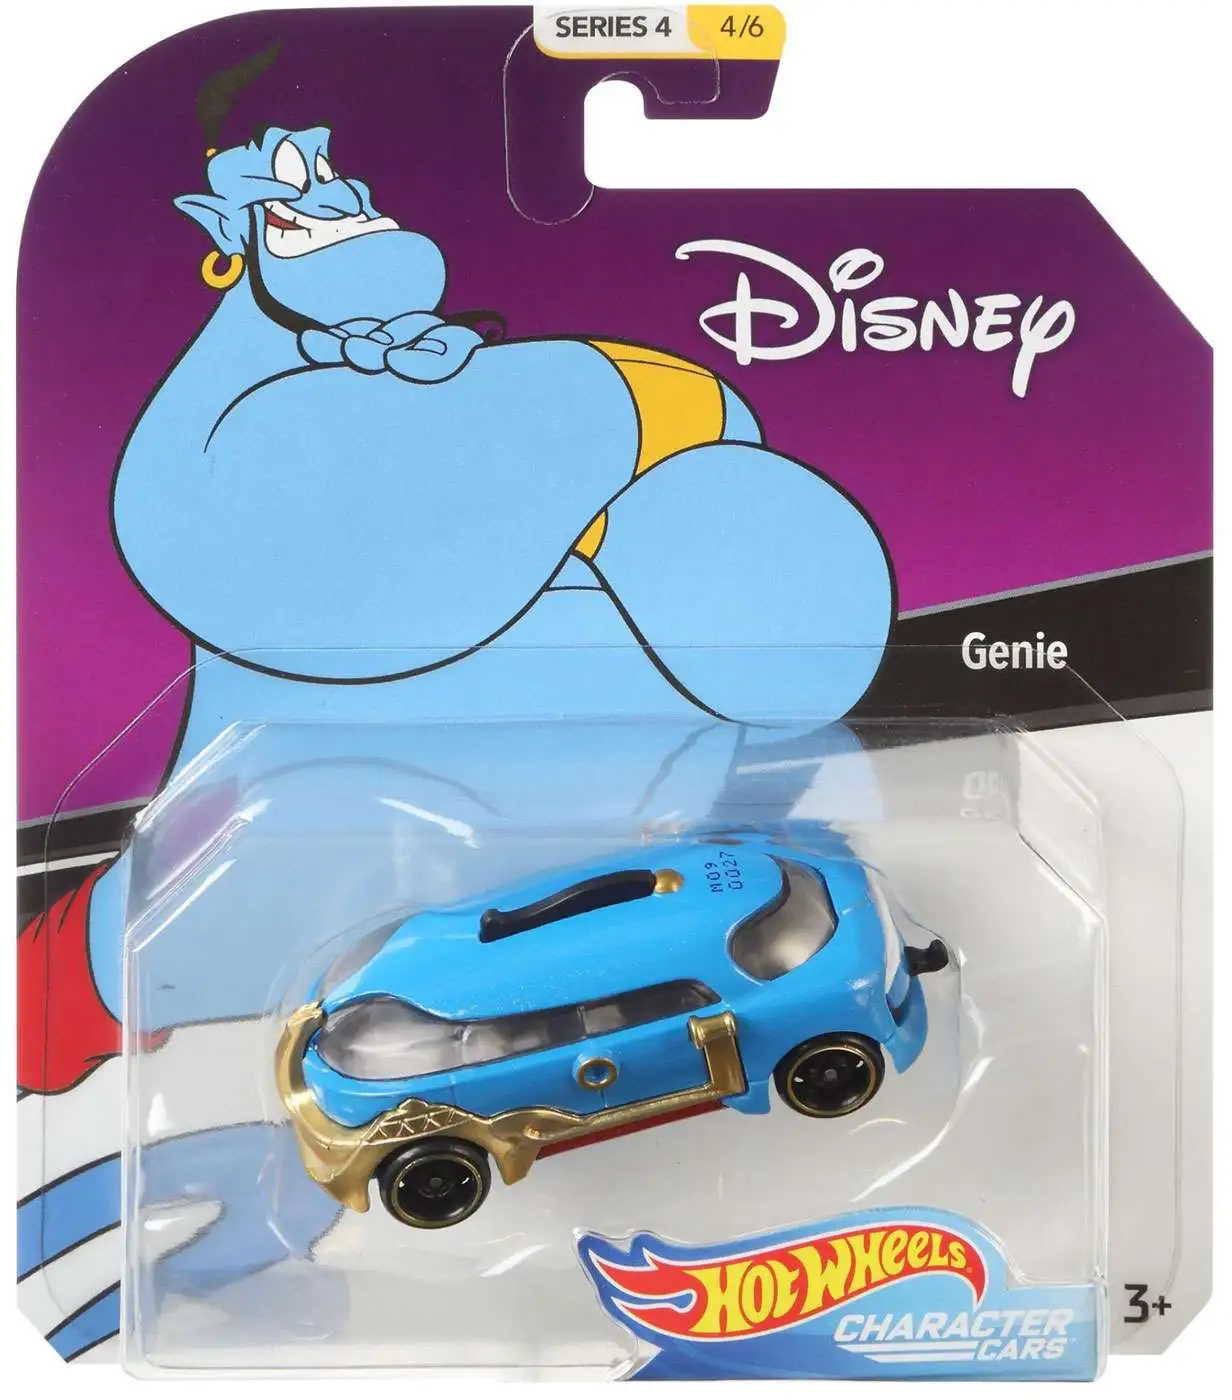 Beast Tinkerbell Dumbo with Maui Goofy Nemo 2019 Hot Wheels Set of 6 Disney/Pixar Character Cars 1/64 Collectible Die Cast Toy Cars 